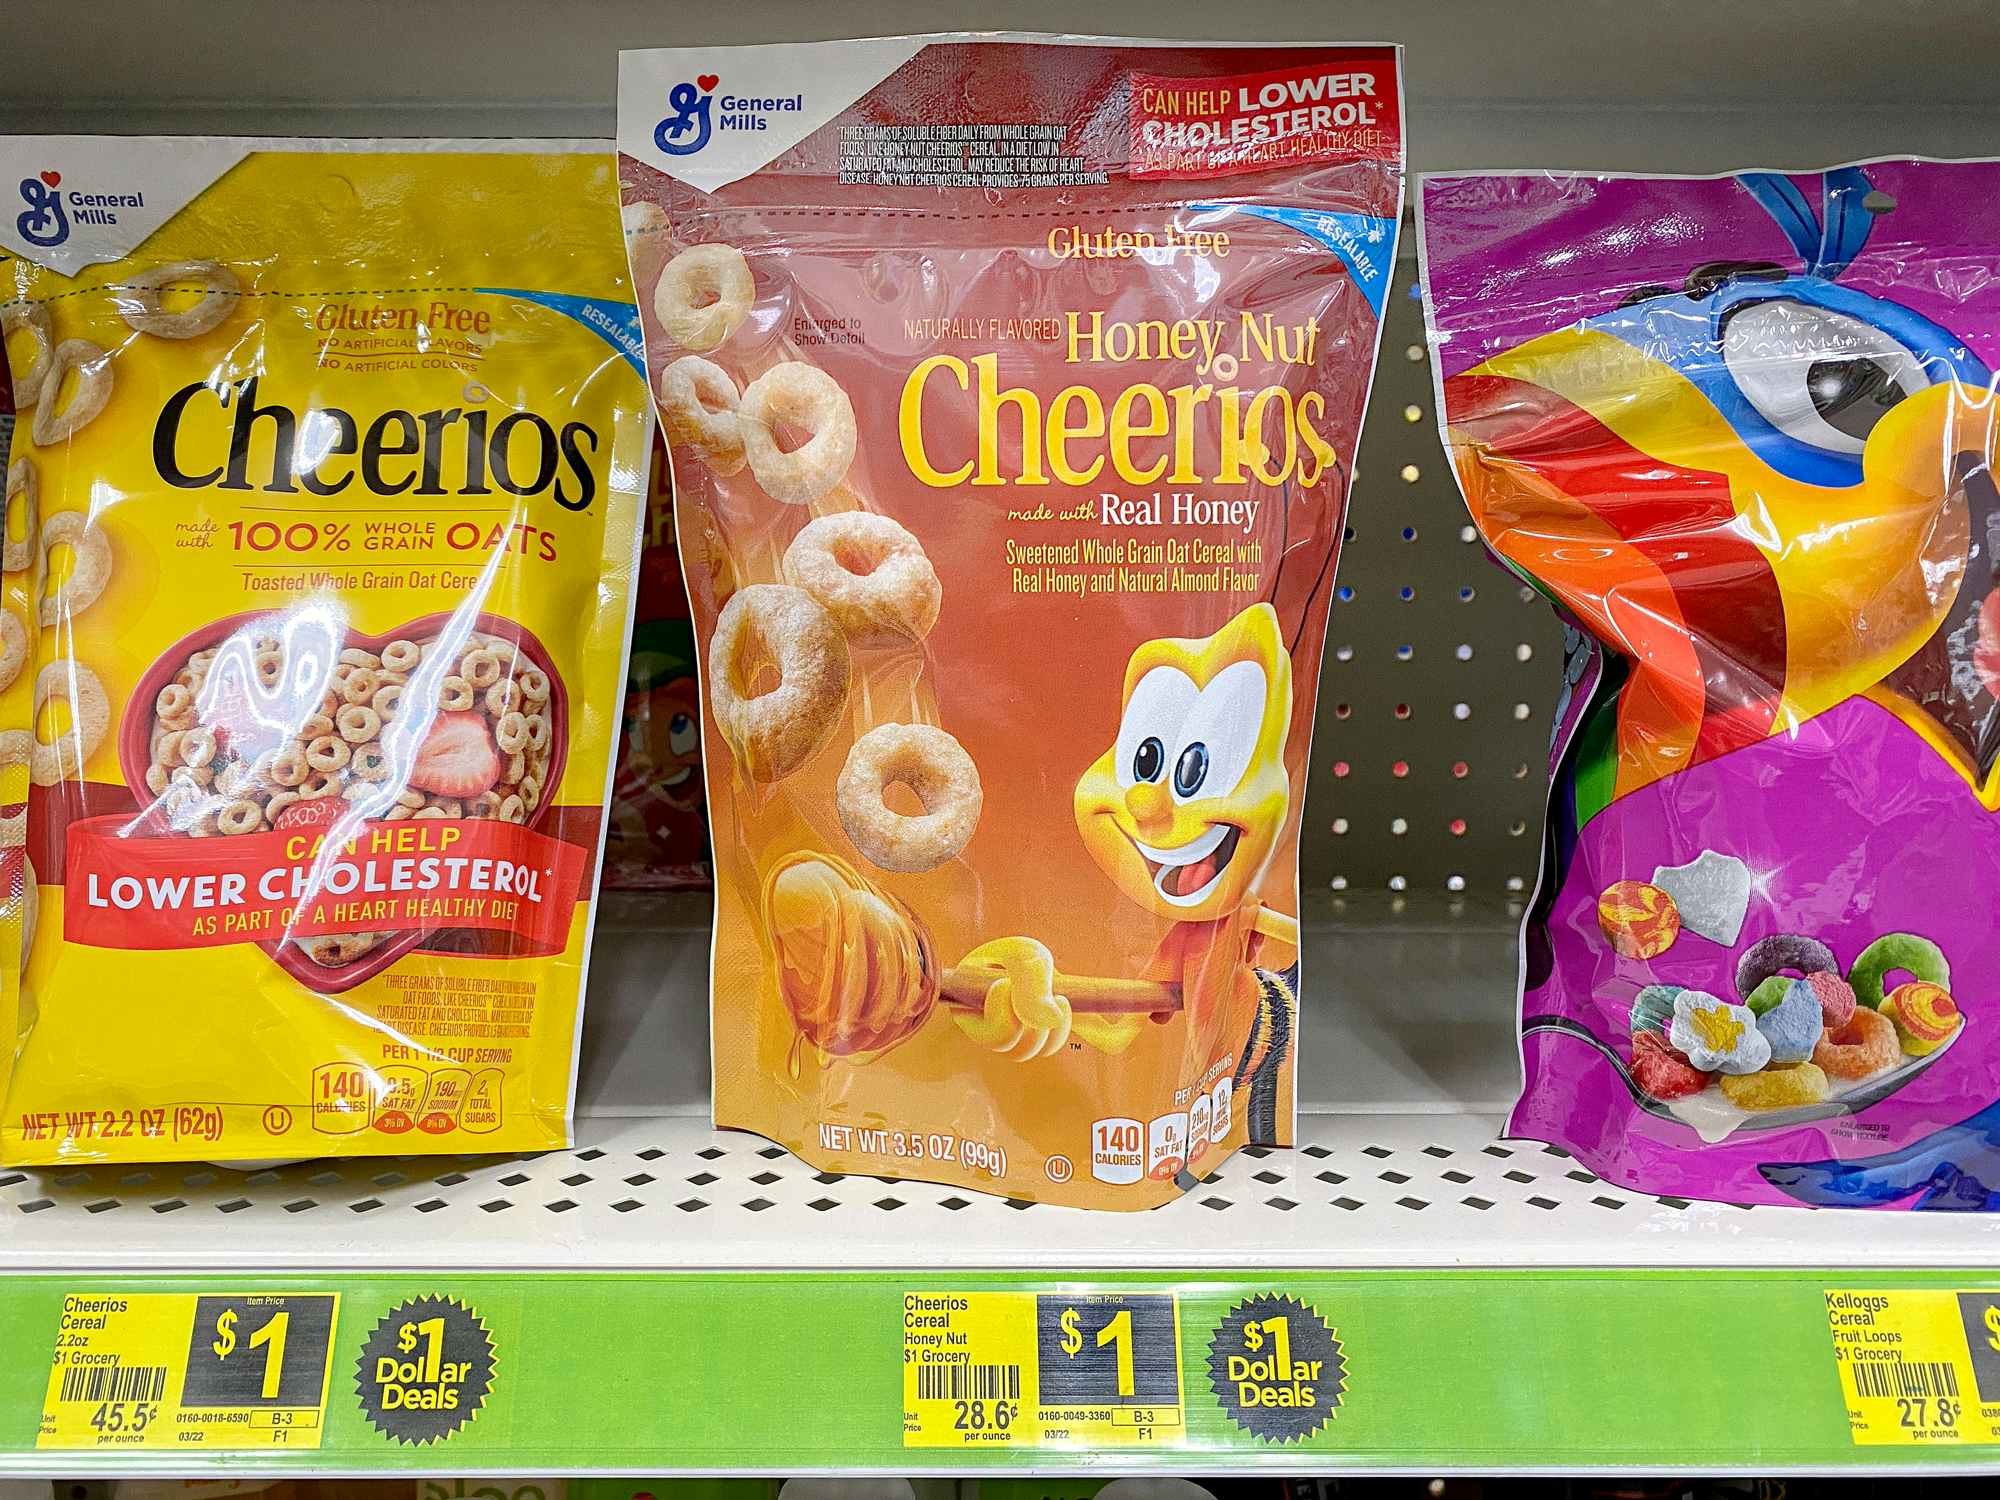 3.5 ounce pouches of cheerios cereal on dollar general shelf for one dollar